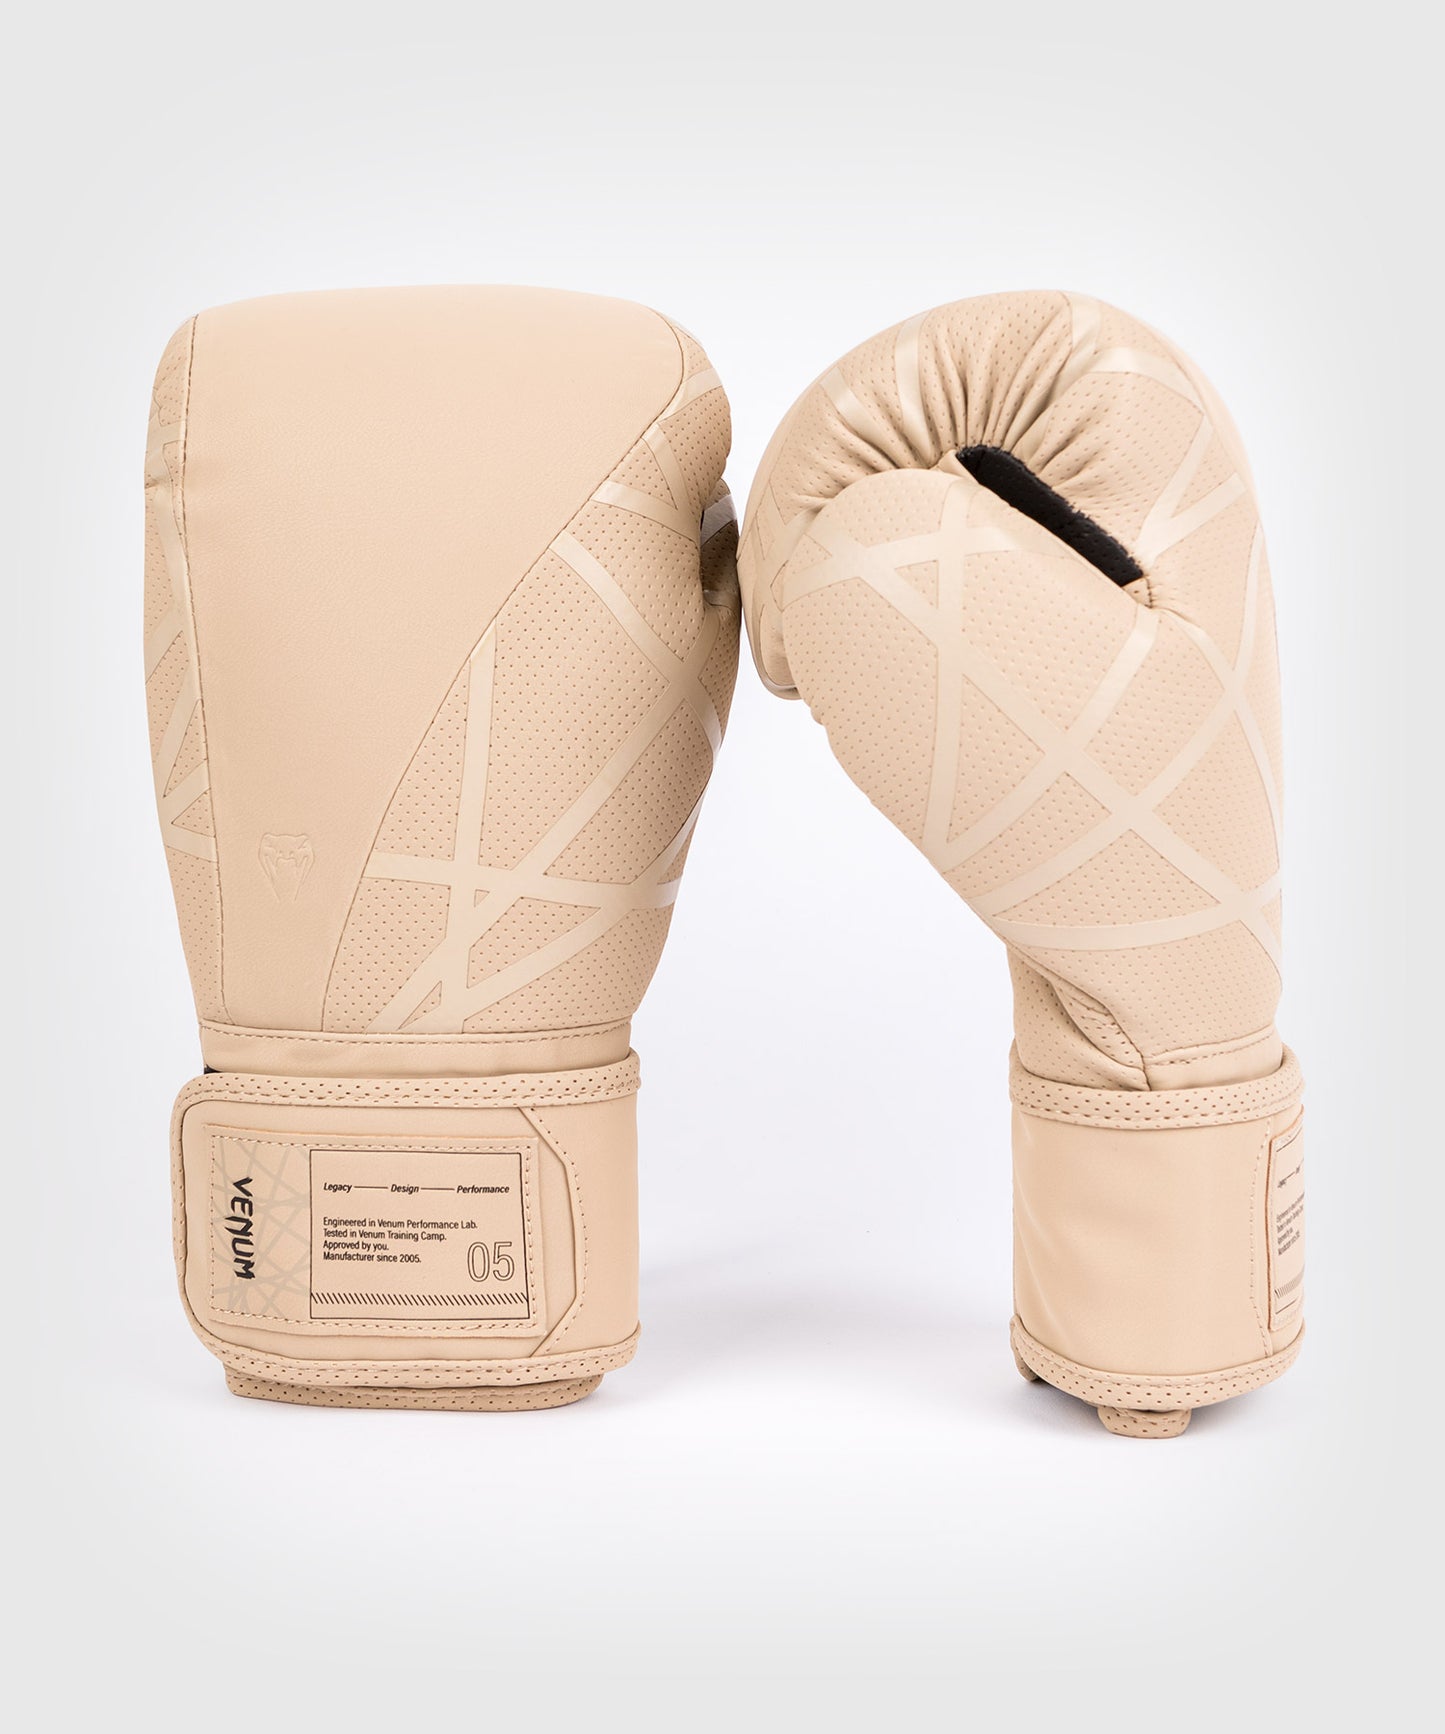 Tecmo 2.0 Boxing Gloves - Sand